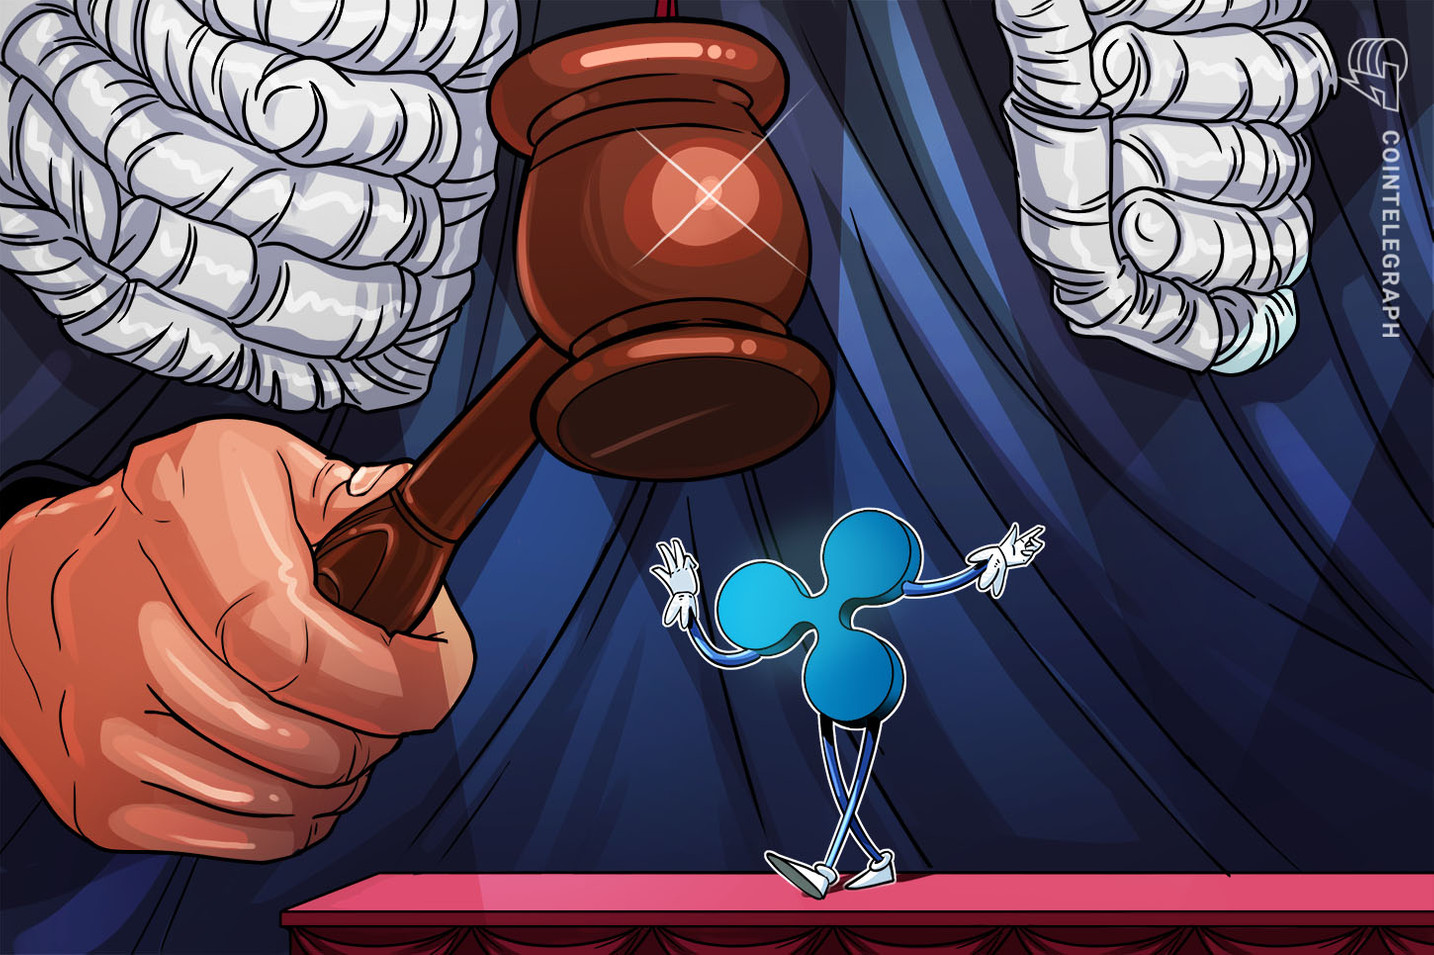 Breaking: Ripple wins case against SEC as judge rules XRP is not a security